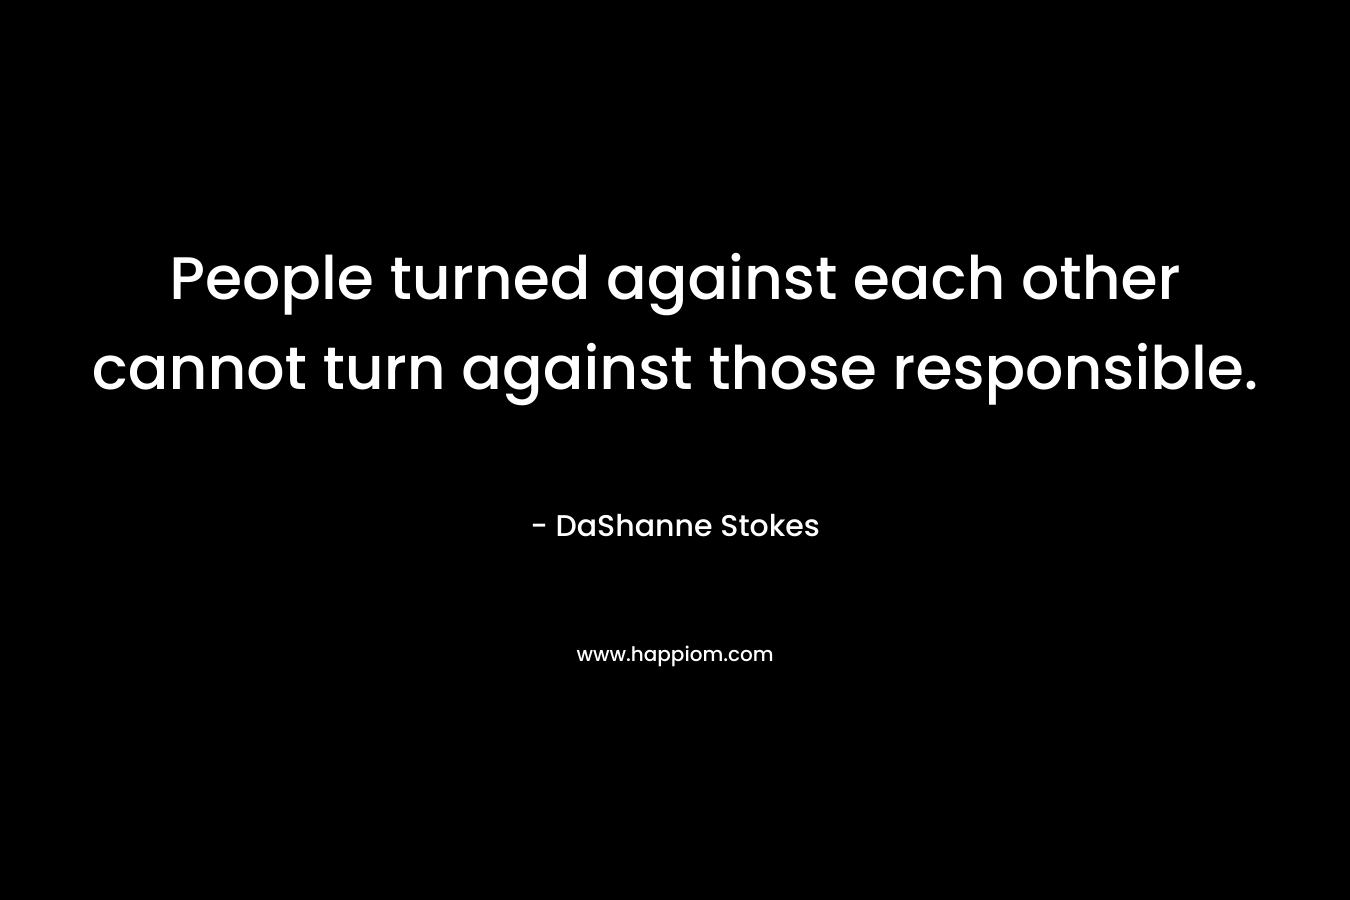 People turned against each other cannot turn against those responsible.